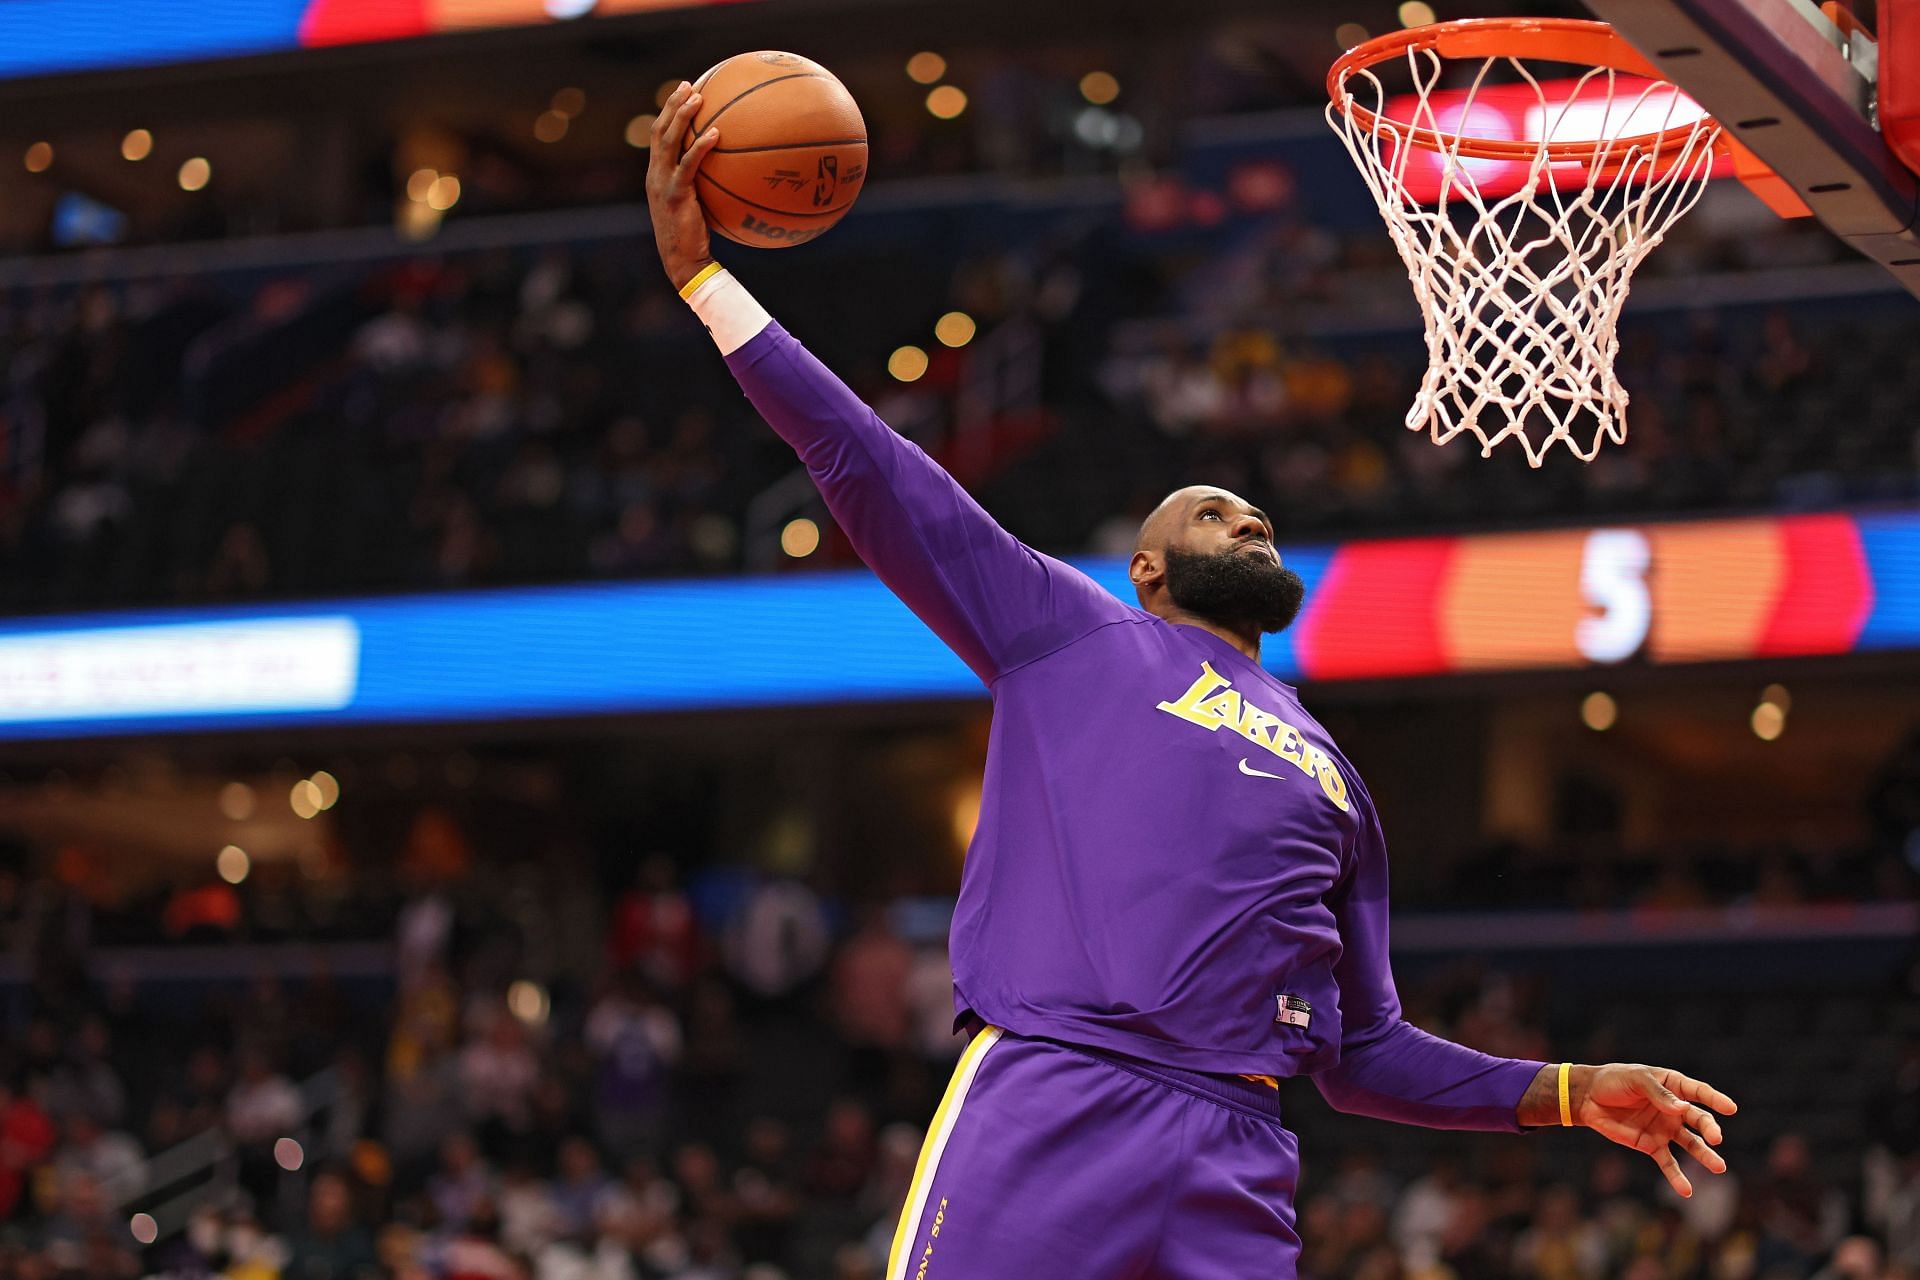 LeBron James warms up before Los Angeles Lakers v Washington Wizards